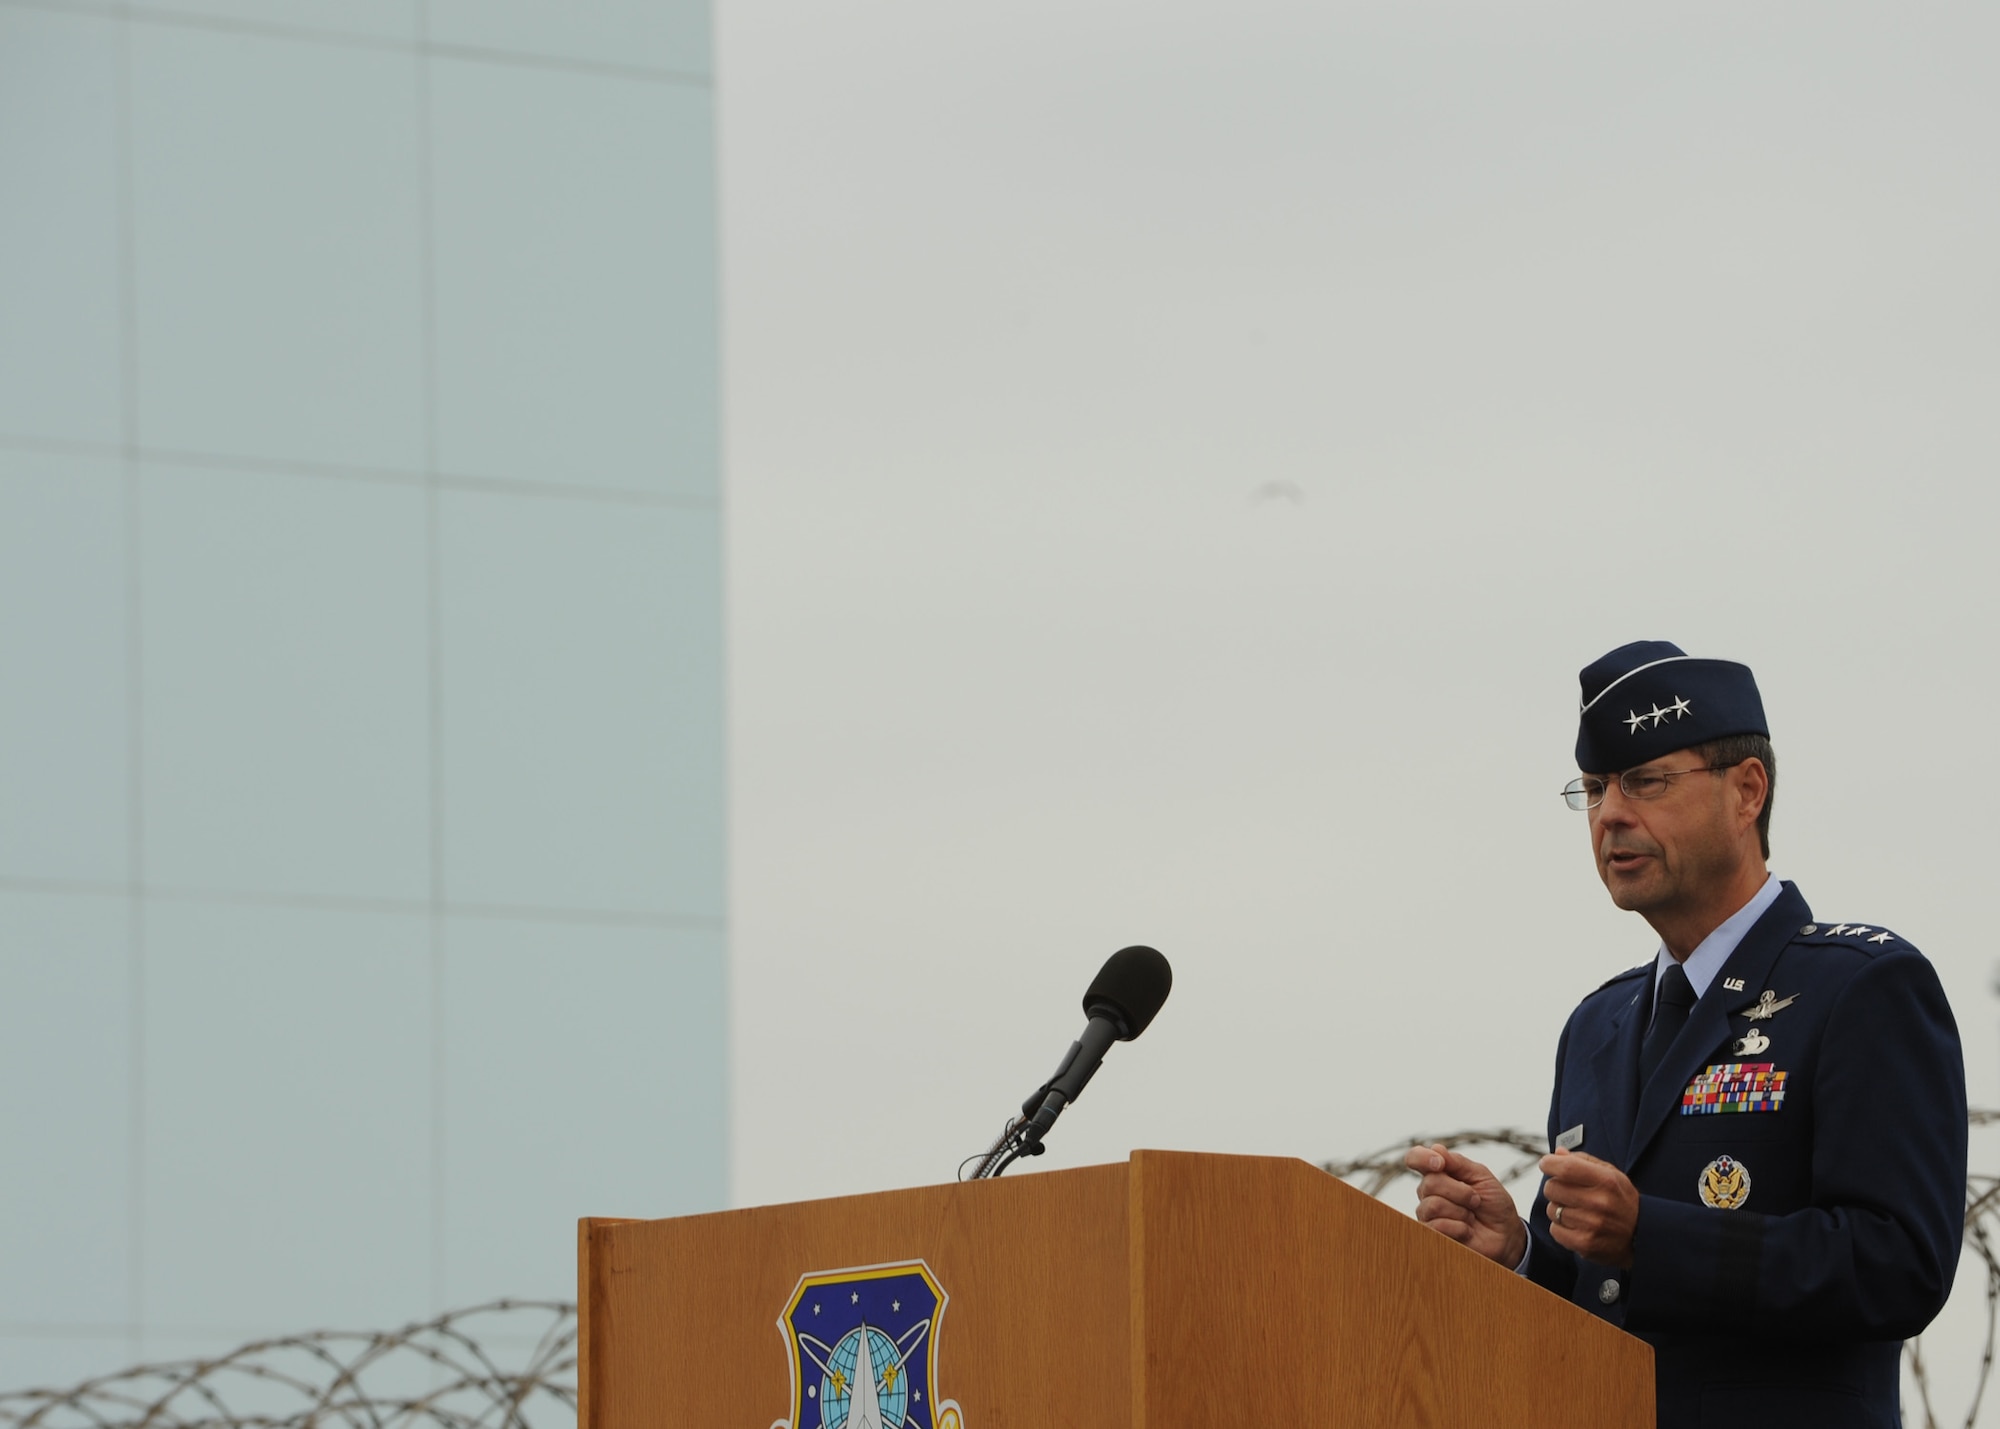 SUNNYVALE, Calif.-- Lt. Gen. John T.Sheridan, commander of the Space Missile Center, Los Angeles Air Force Base, delivers a speech at the closure ceremony of Onizuka Air Force Station here, Wednesday, July 28, 2010. Built in 1960, Onizuka AFS was originally known as the Air Force Satellite Test Center. It was selected for closure by the Base Closure and Realignment Commission in 2005, with the recommendation to move operations to Vandenberg Air Force Base, in order to consolidate satellite command and control operations while reducing excess infrastructure.(U.S. Air Force Photo/Senior Airman Bryan Boyette)